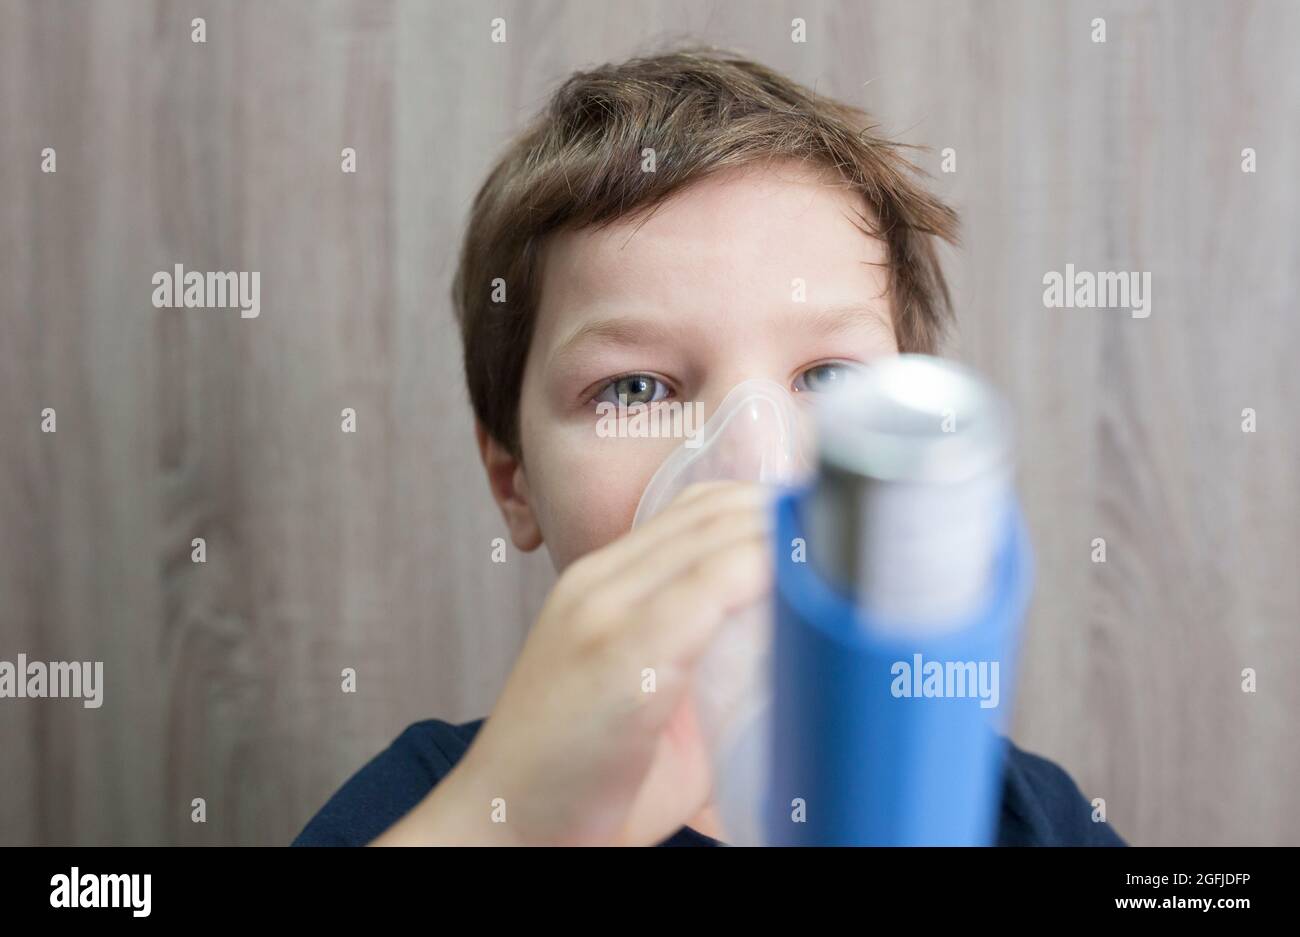 Child boy using medical spray for breath. Inhaler, spacer and mask. Front view Stock Photo